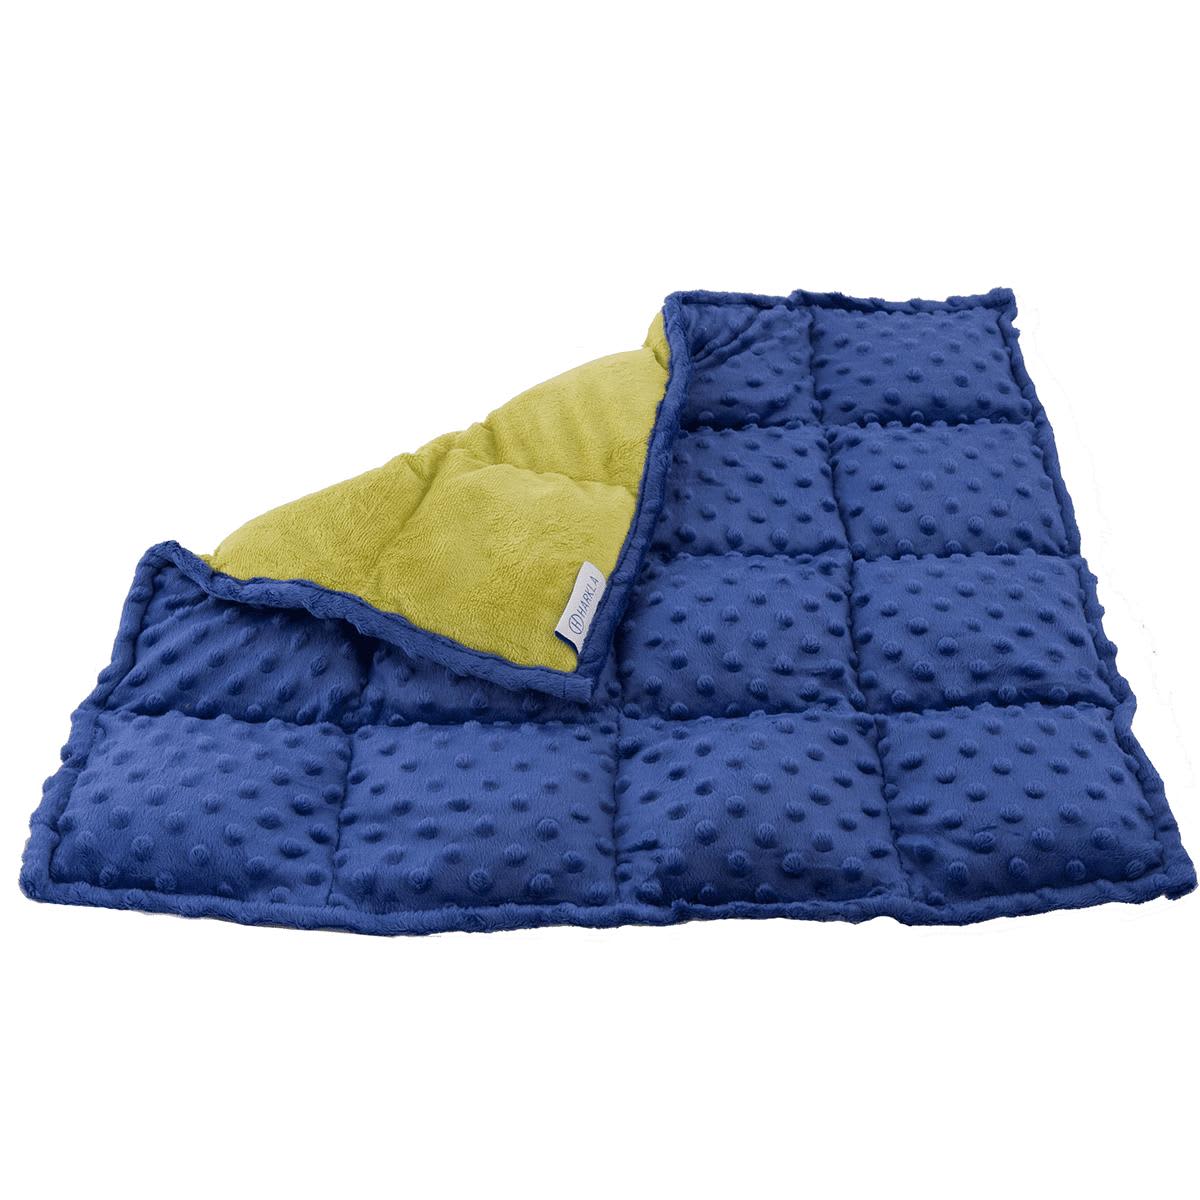 https://cdn.apartmenttherapy.info/image/upload/v1621351822/at/style/2021-05/guide%20to%20weighted%20blankets/harkla-lap-pad-weighted-lap-pad-3858710003776_1200x.progressive.png_1.jpg